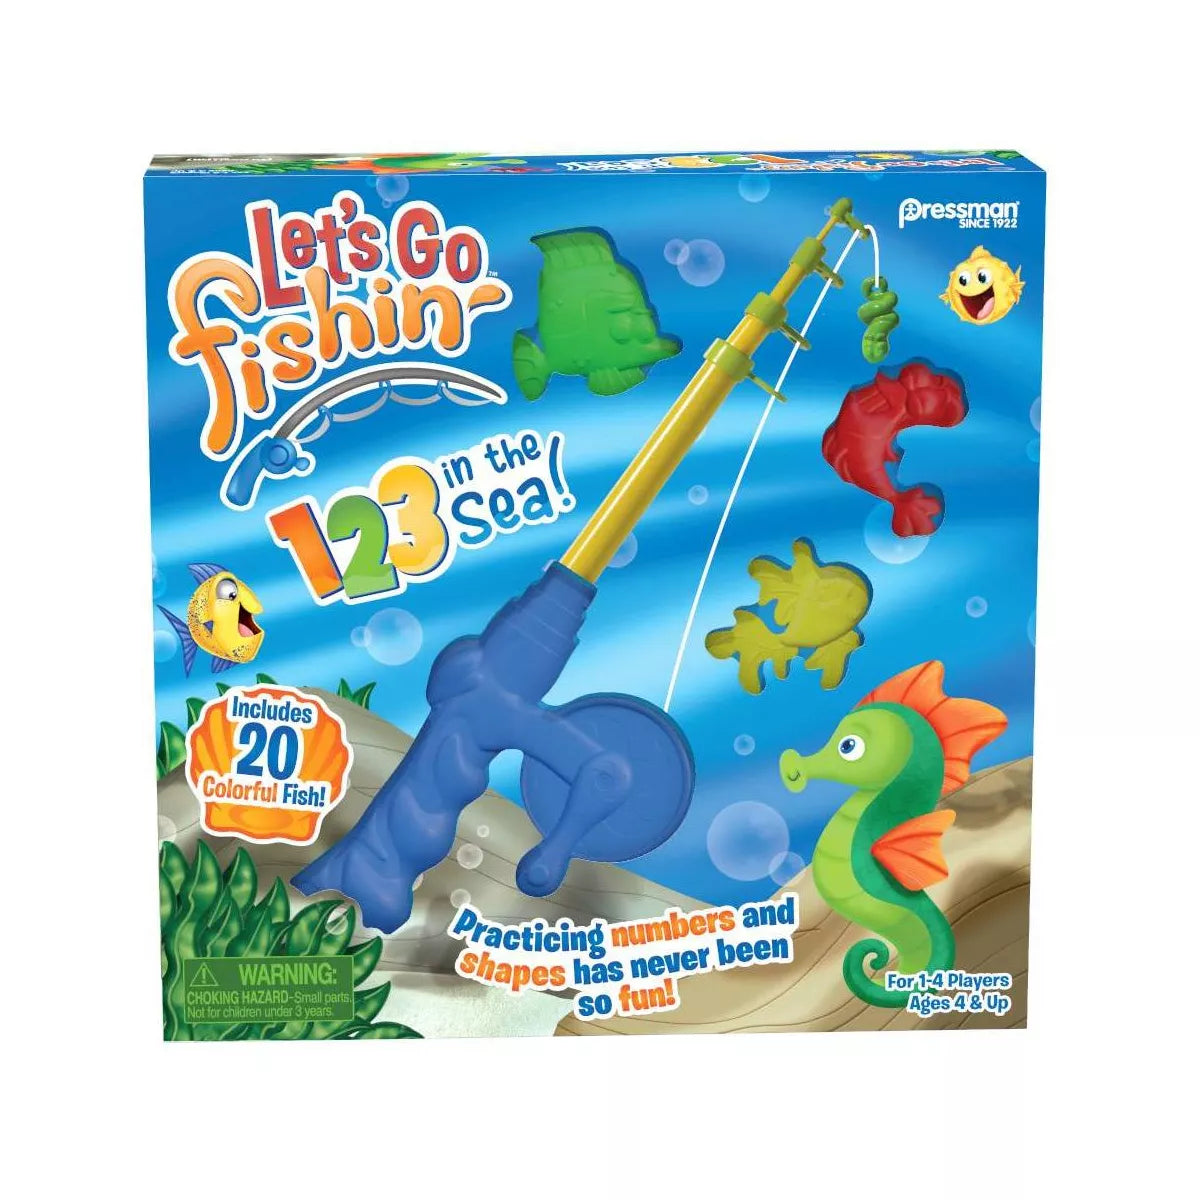 Let's Go Fishin' Game from Pressman Toy 